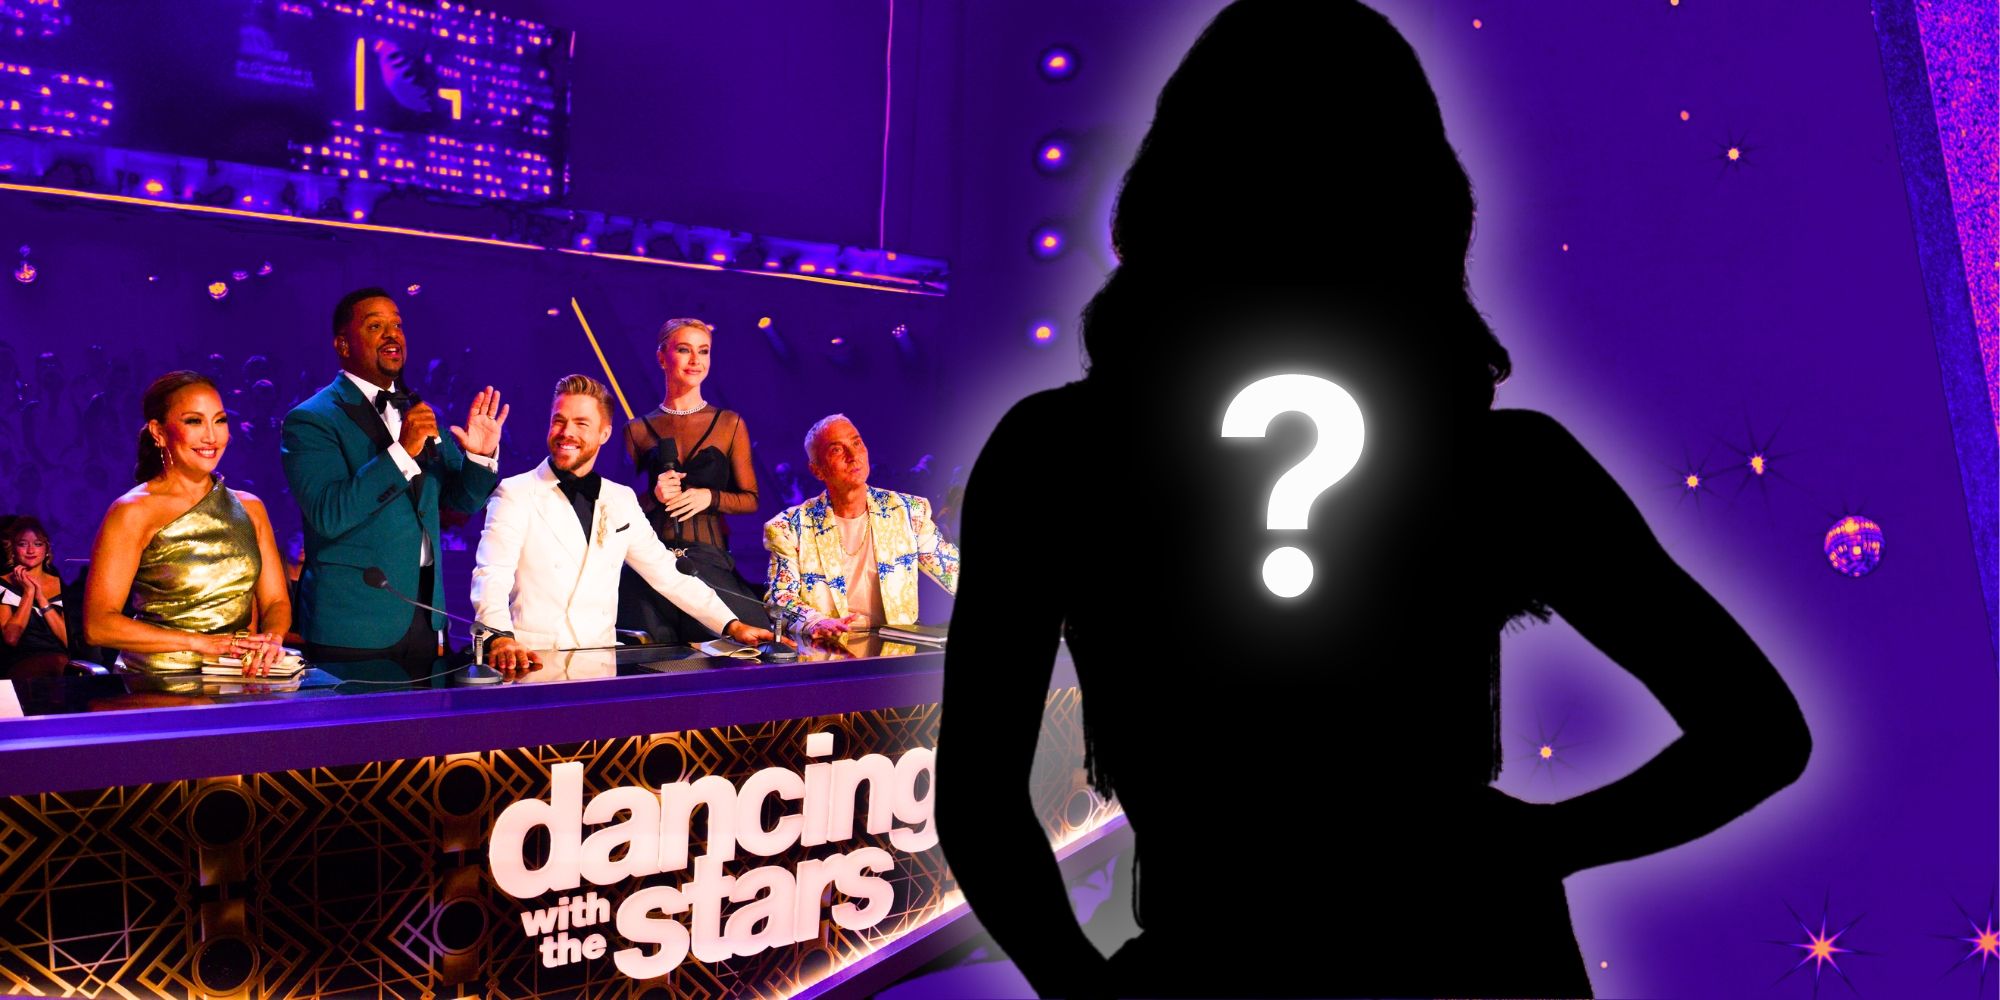 Dancing with the Stars judges Derek Hough, Carrie Ann Inaba, Bruno Tonioli, Alfonso Ribeiro and Julianne Hough stand and sit behind the judges' table. A silhouette of a woman is next to them.